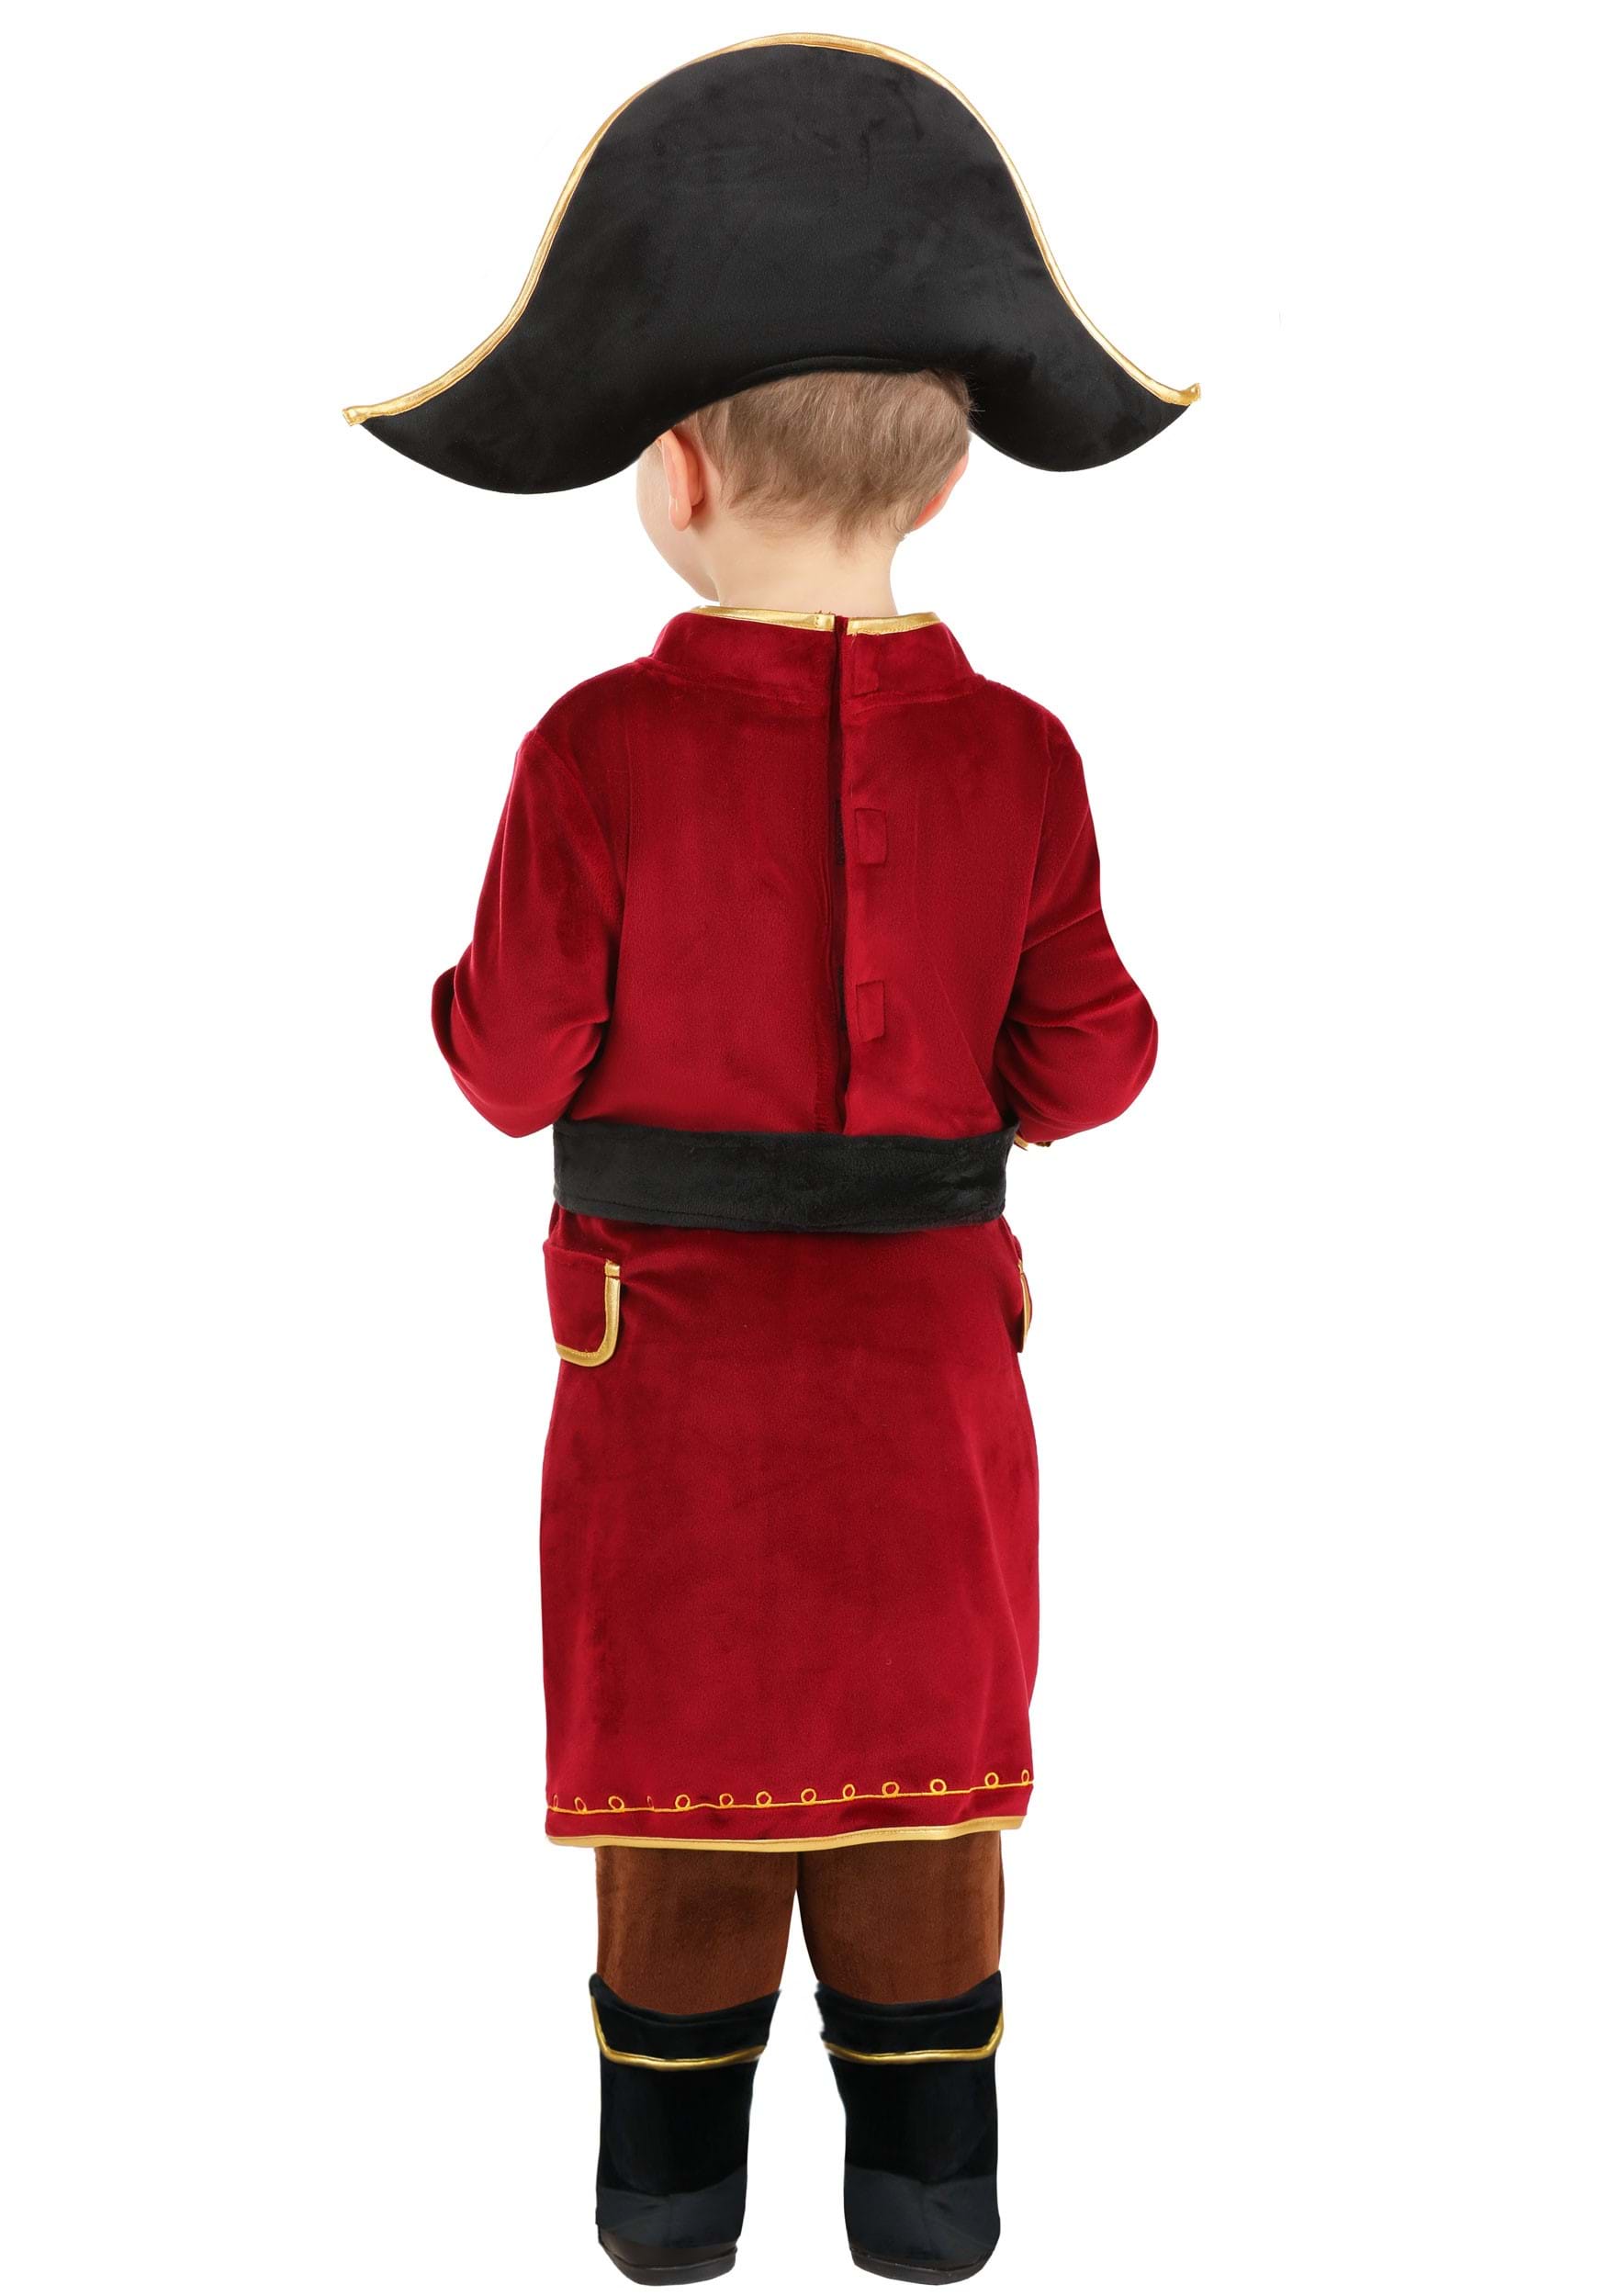 Toddler Captain Cutie Pirate Costume for Boys